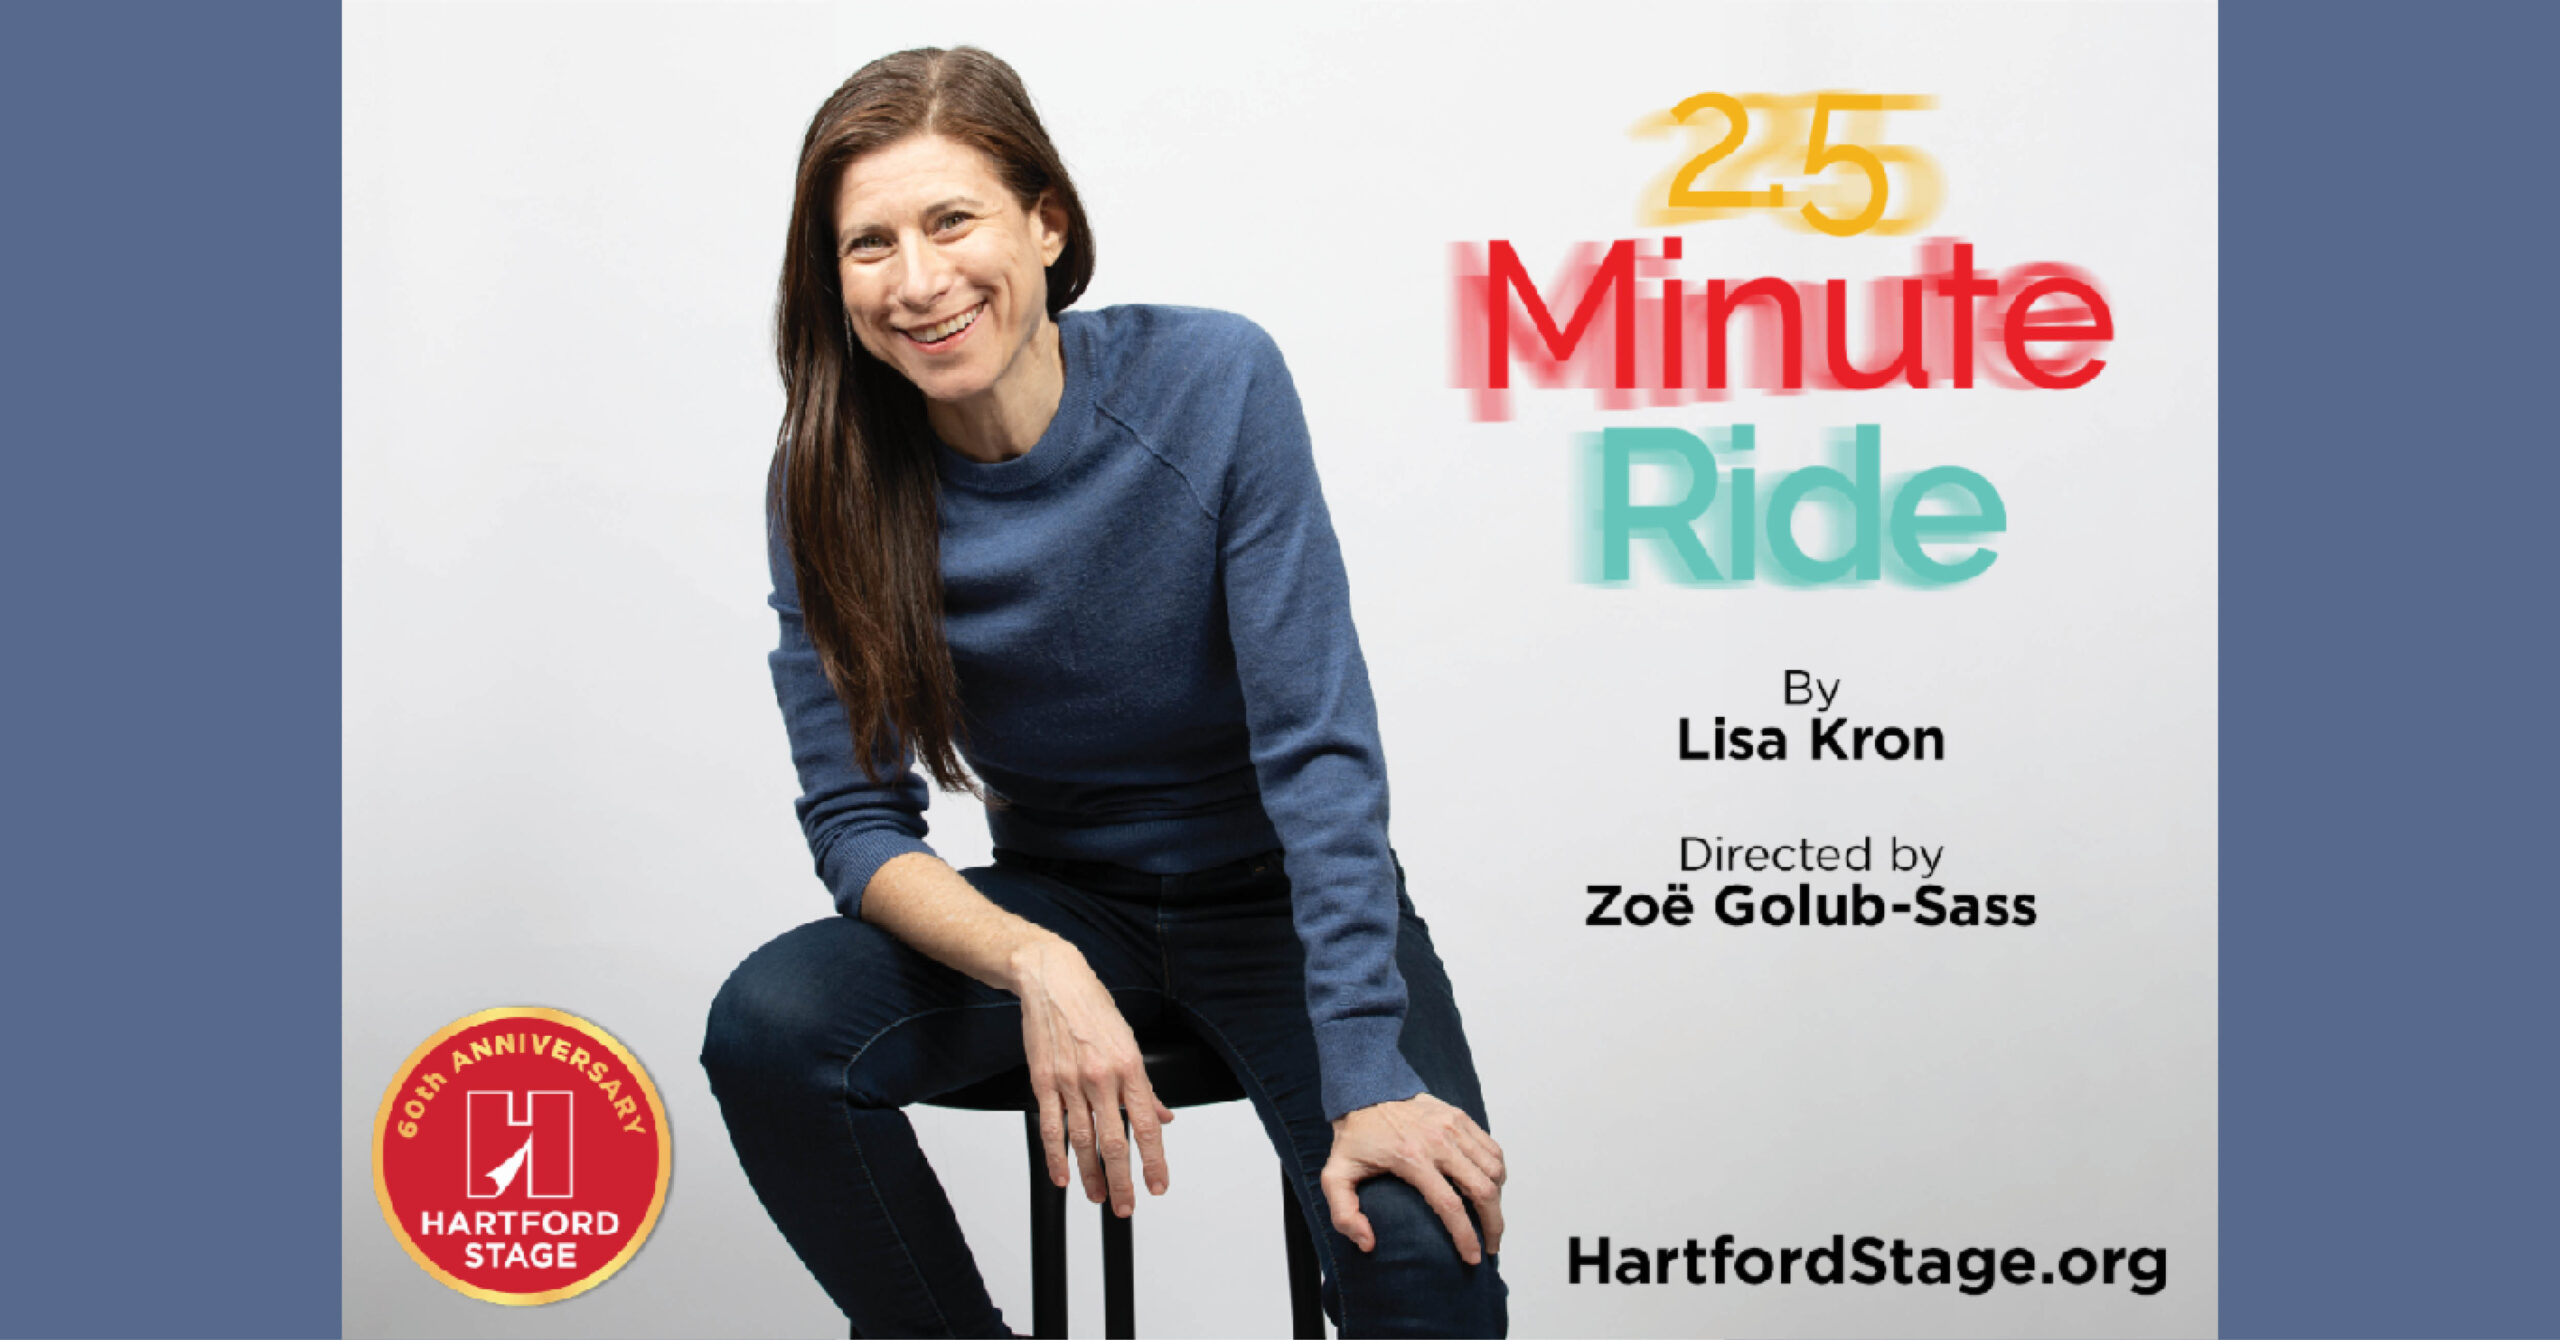 2.5 Minute Ride